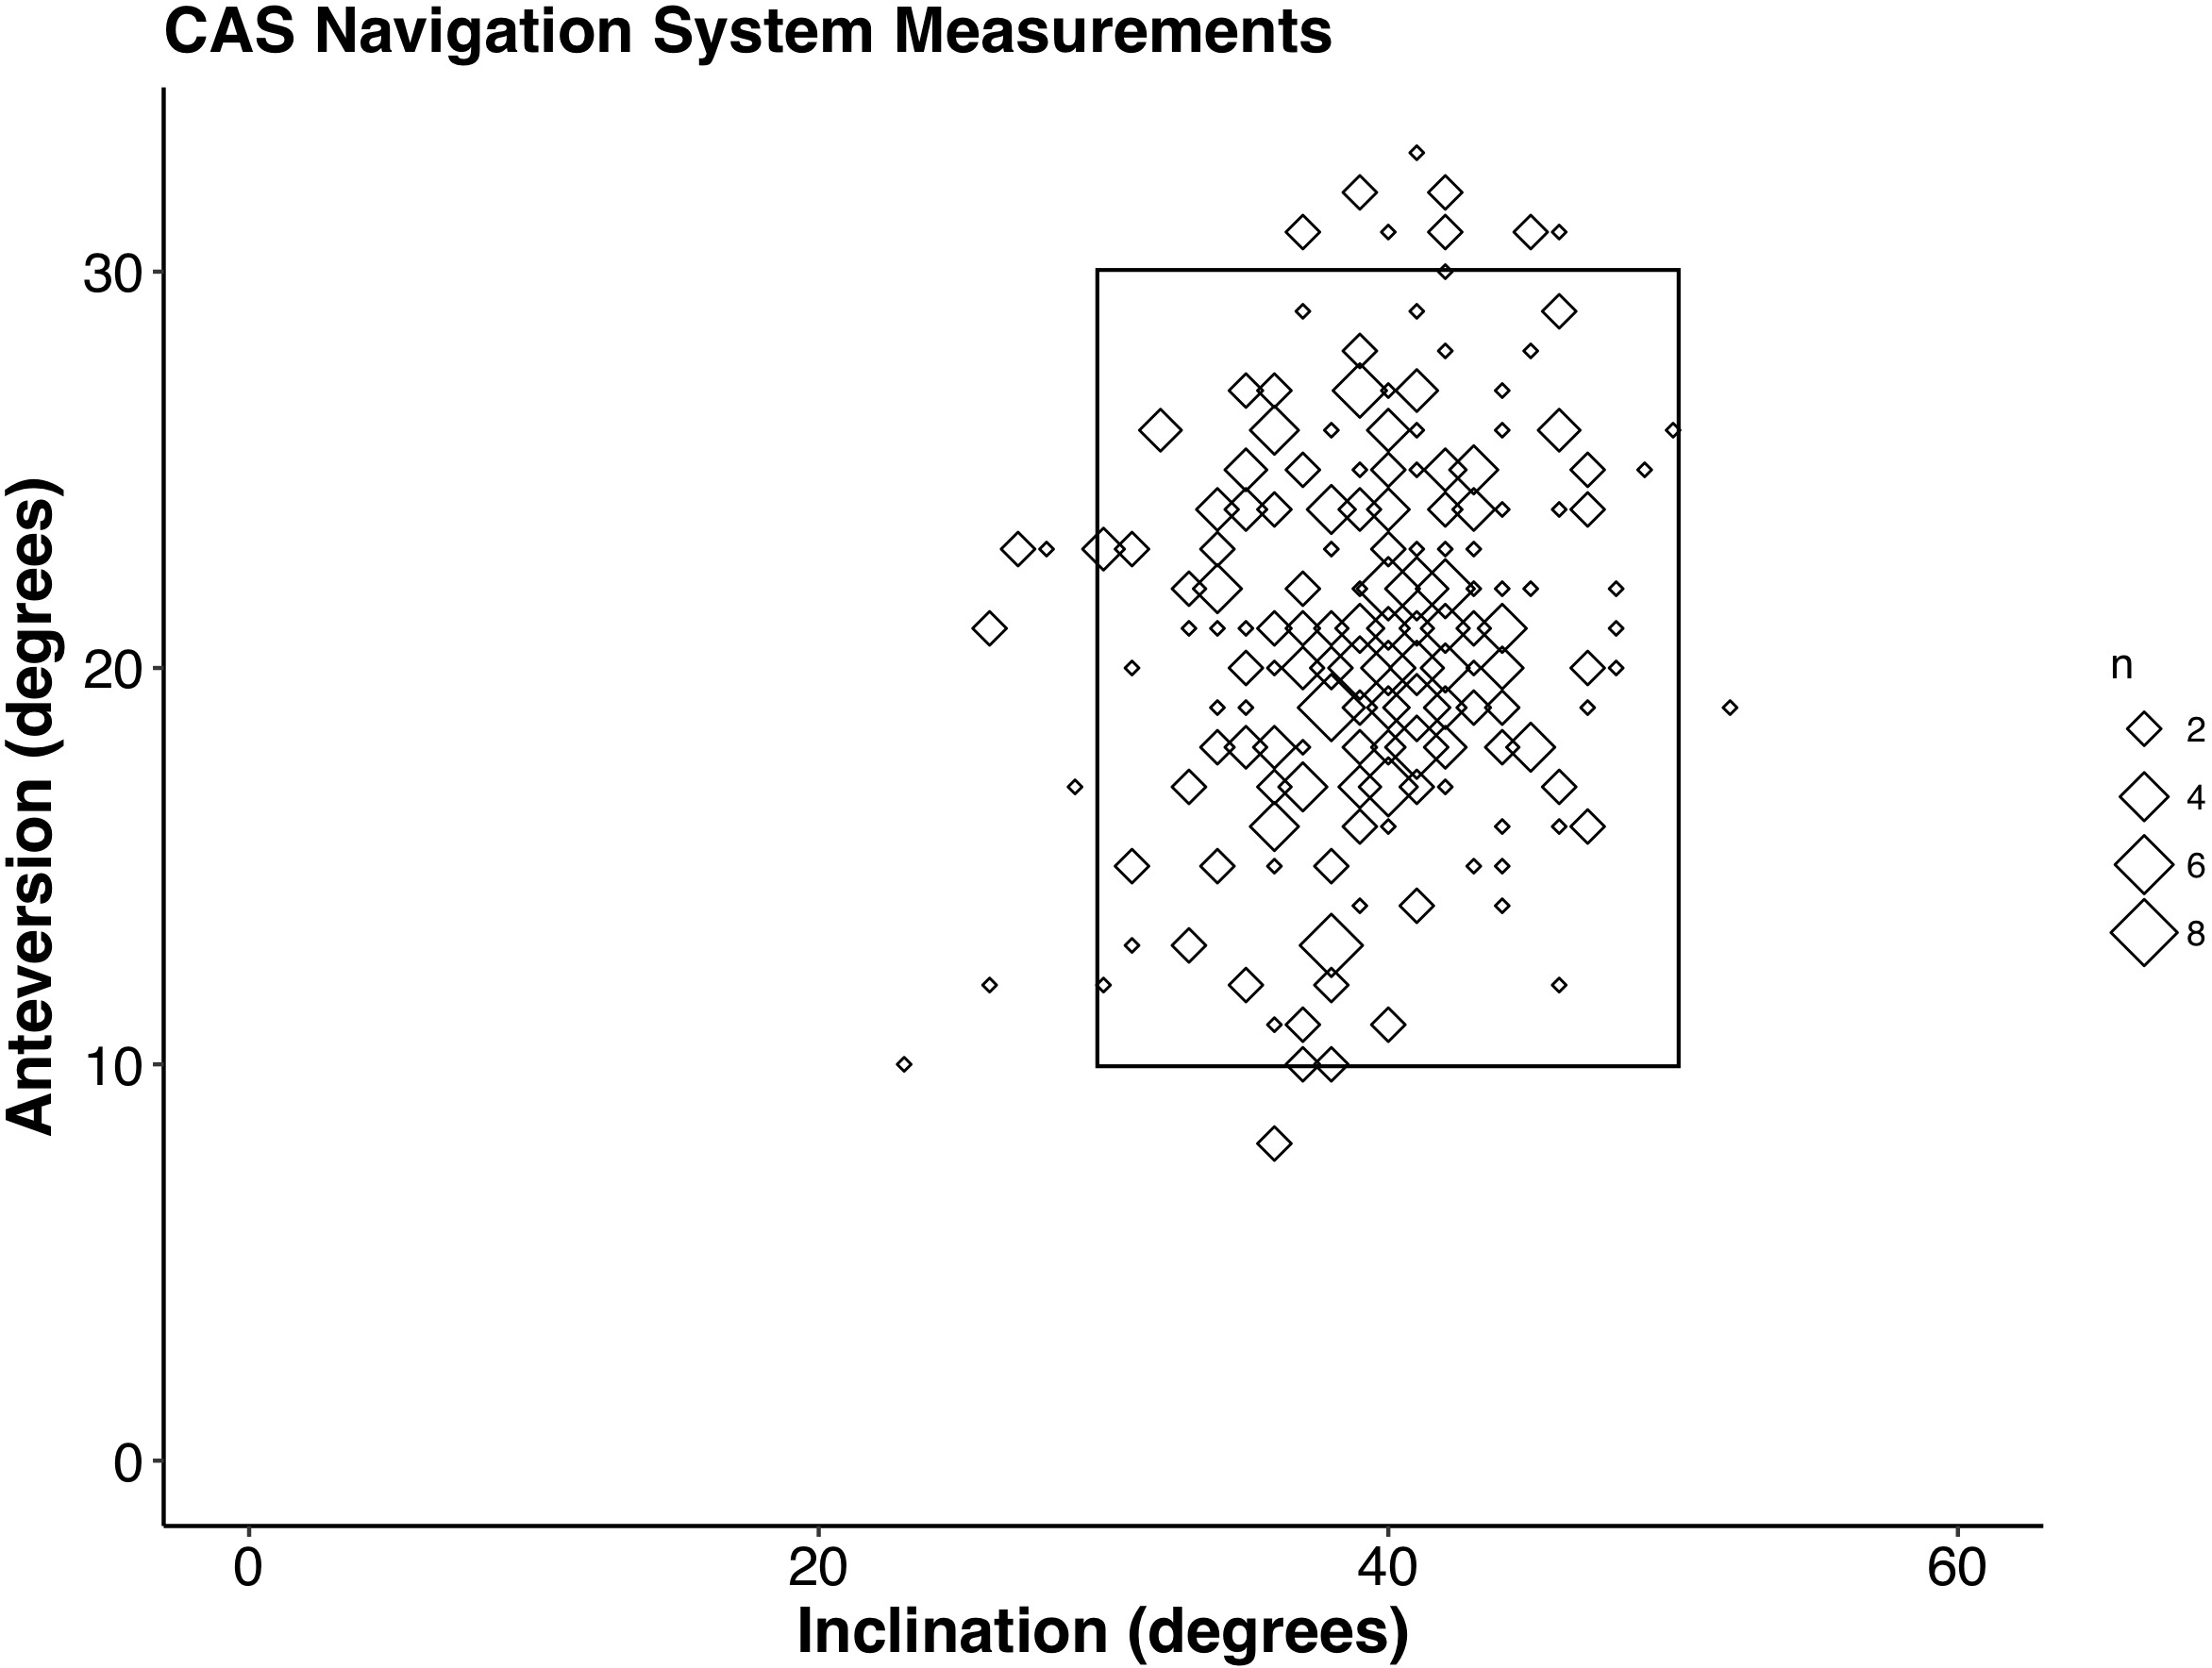 Fig. 4 
          Intraoperative computer-assisted surgery (CAS) measurements for inclination and anteversion of every hip relative to the target zone of 40° ± 10° for inclination and 20° ± 10° for anteversion. For CAS measurements, 330 (93%) hips were within the zone for both inclination and anteversion. When broken down by inclination and anteversion, 345 (97%) hips were within the target for inclination and 339 (96%) for anteversion.
        